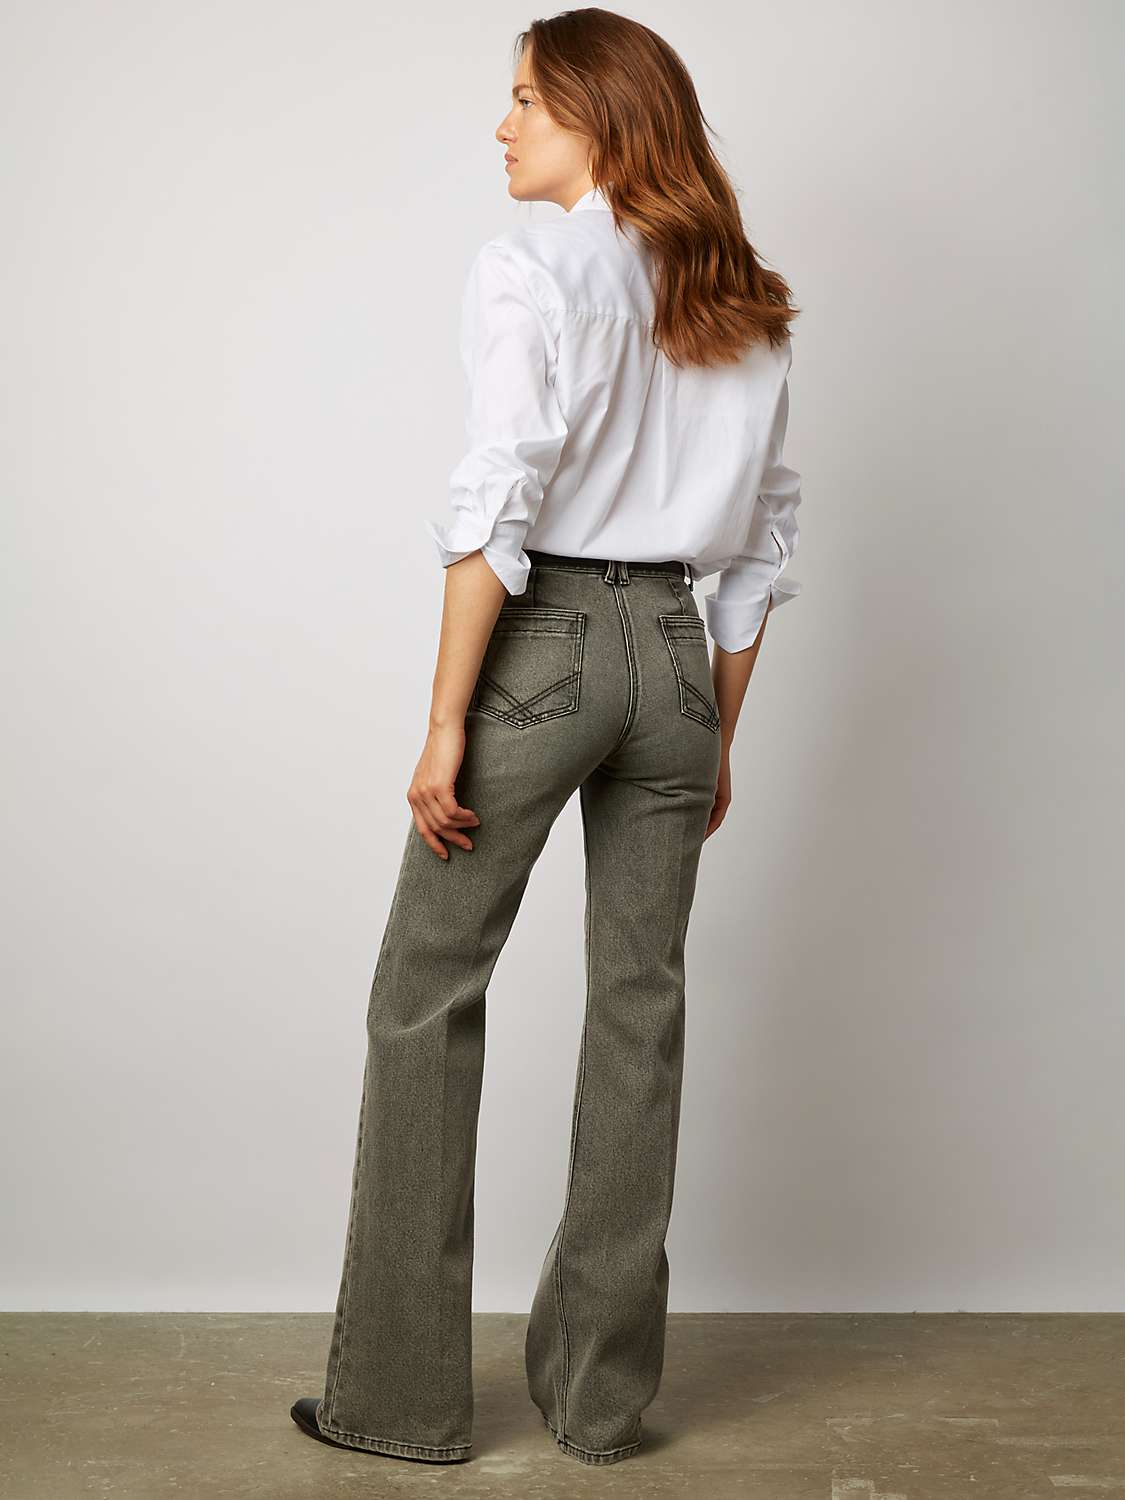 Buy Gerard Darel Anna Bootcut Jeans, Charcoal Online at johnlewis.com